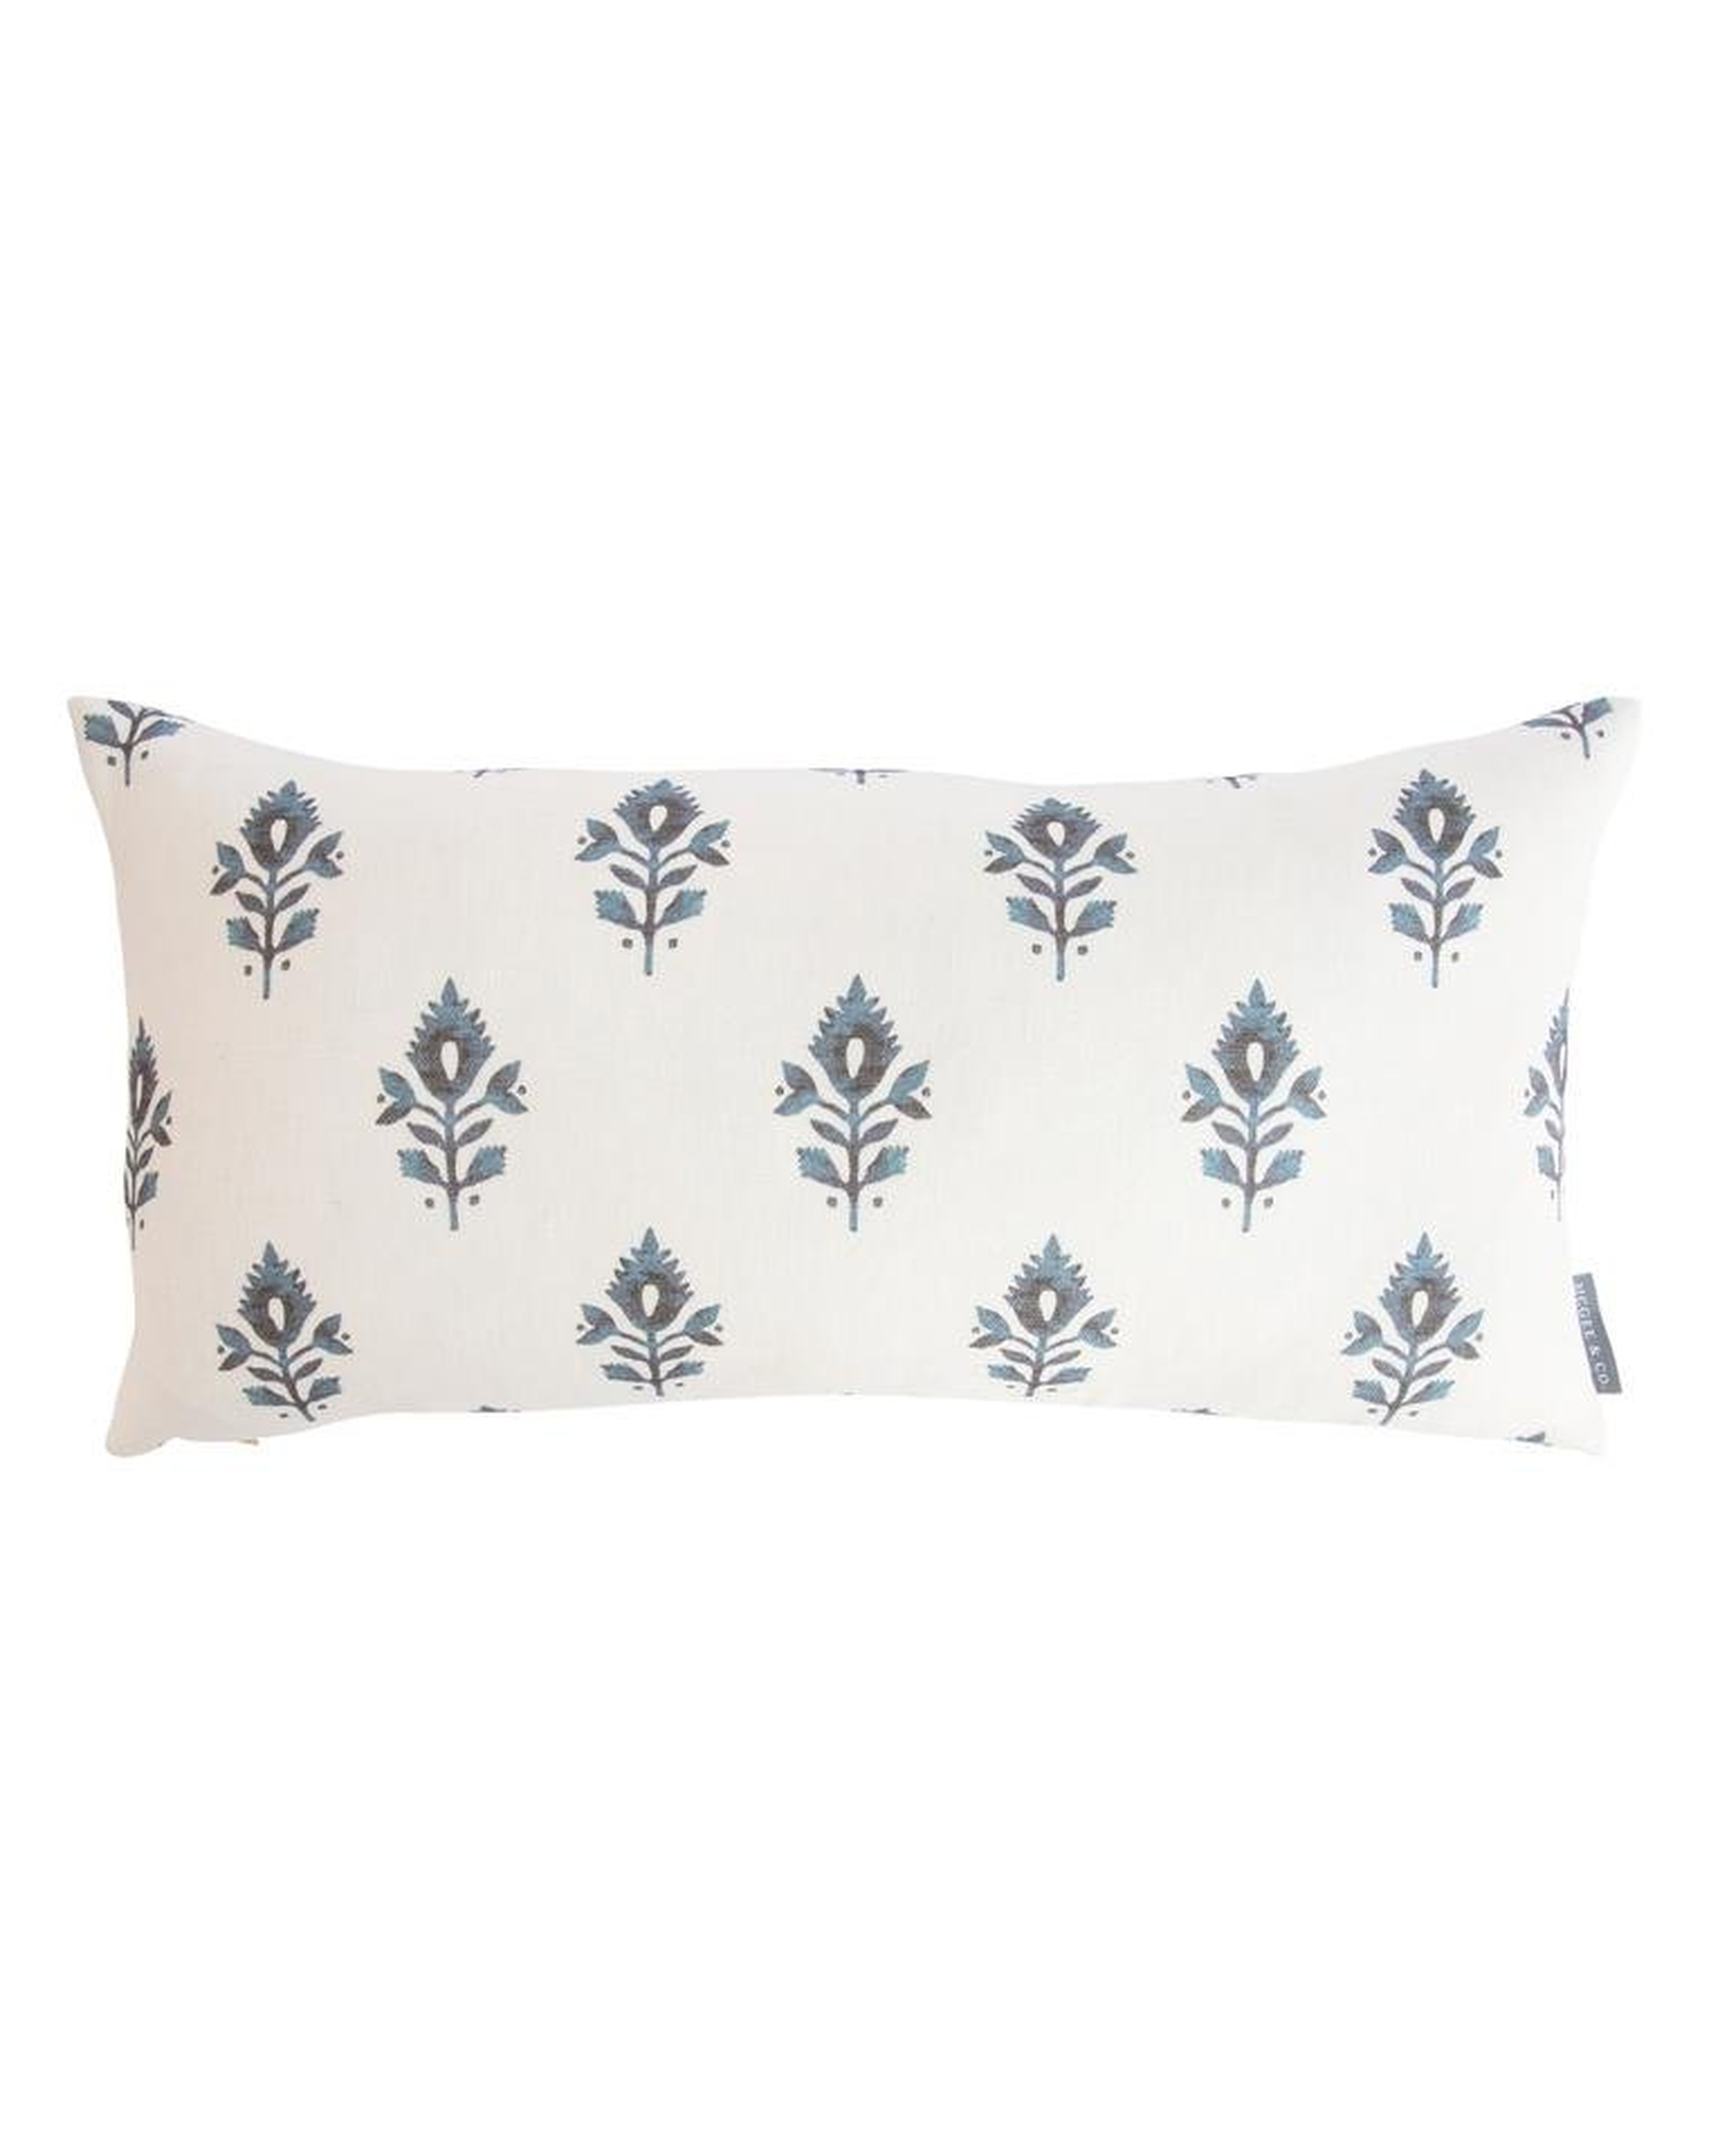 ADDISON BLOCK PRINT PILLOW WITHOUT INSERT, 12" x 24" - McGee & Co.